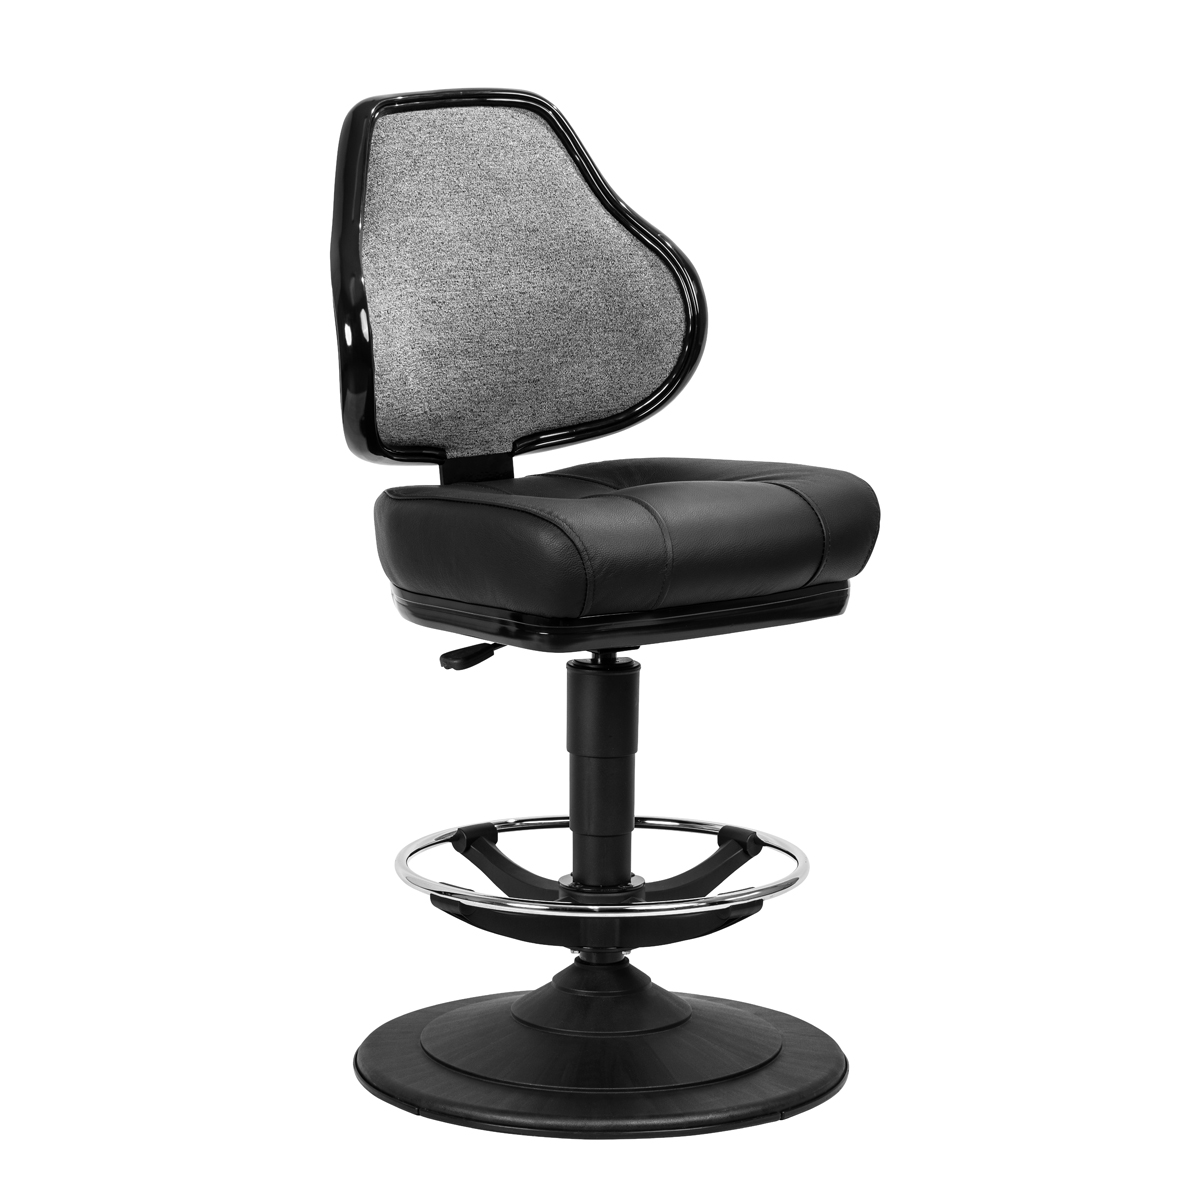 Orion casino gaming chair for slot machines and table games